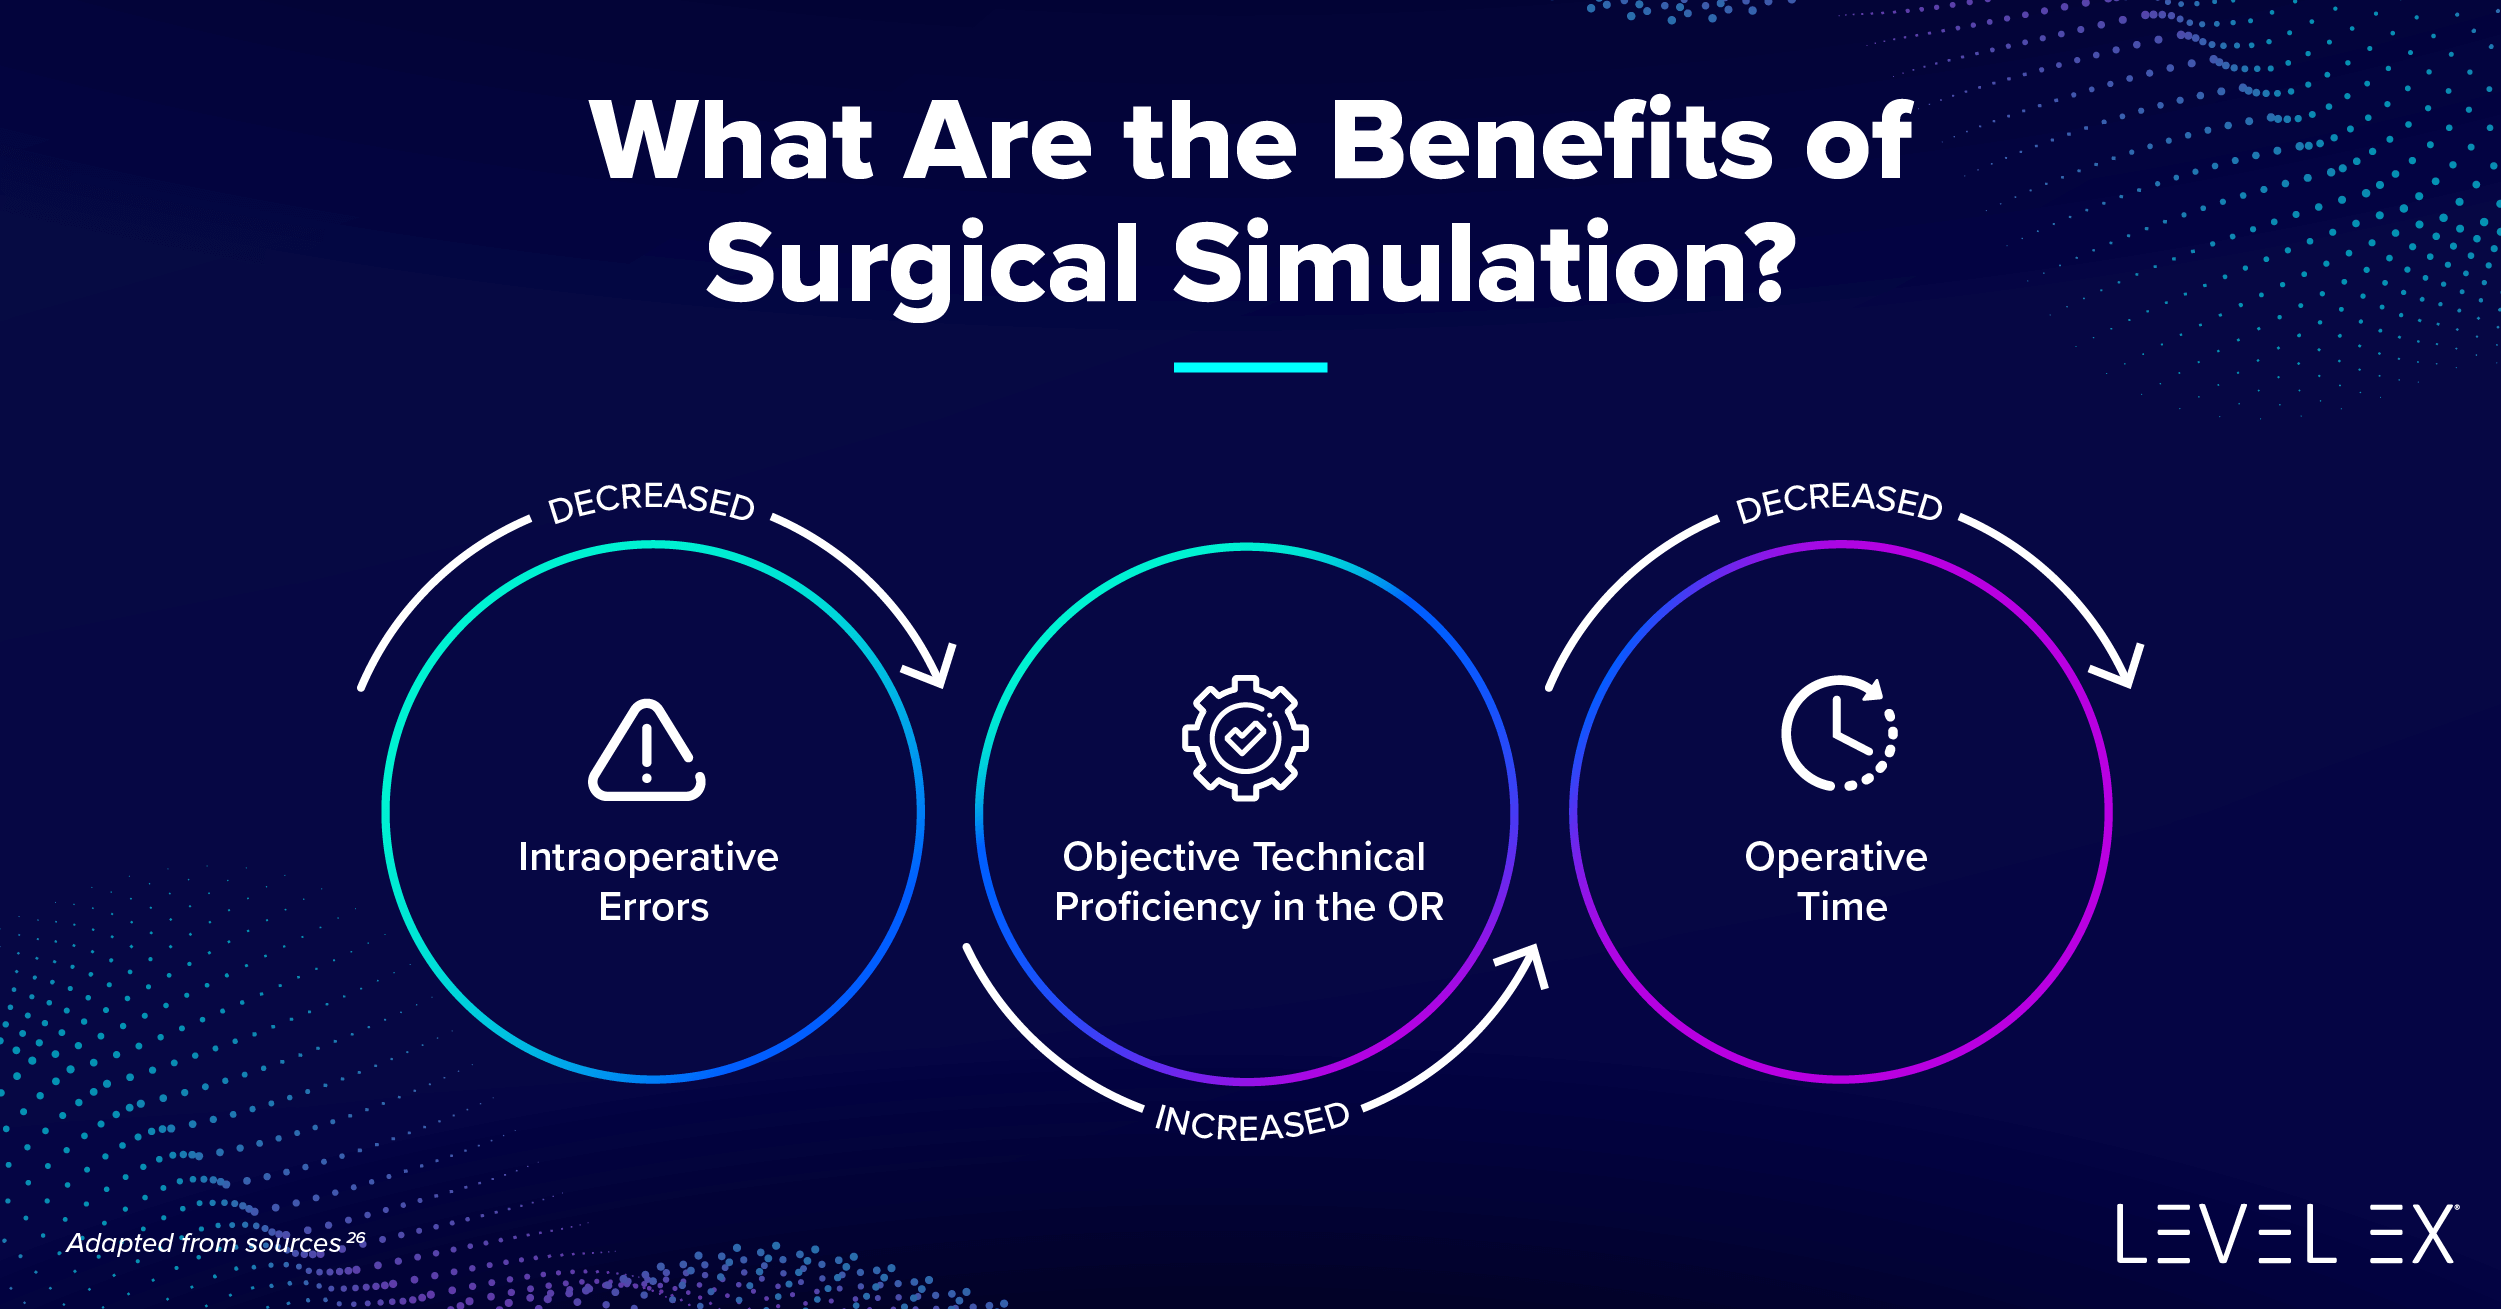 Visual: What are the benefits of surgical simulation?